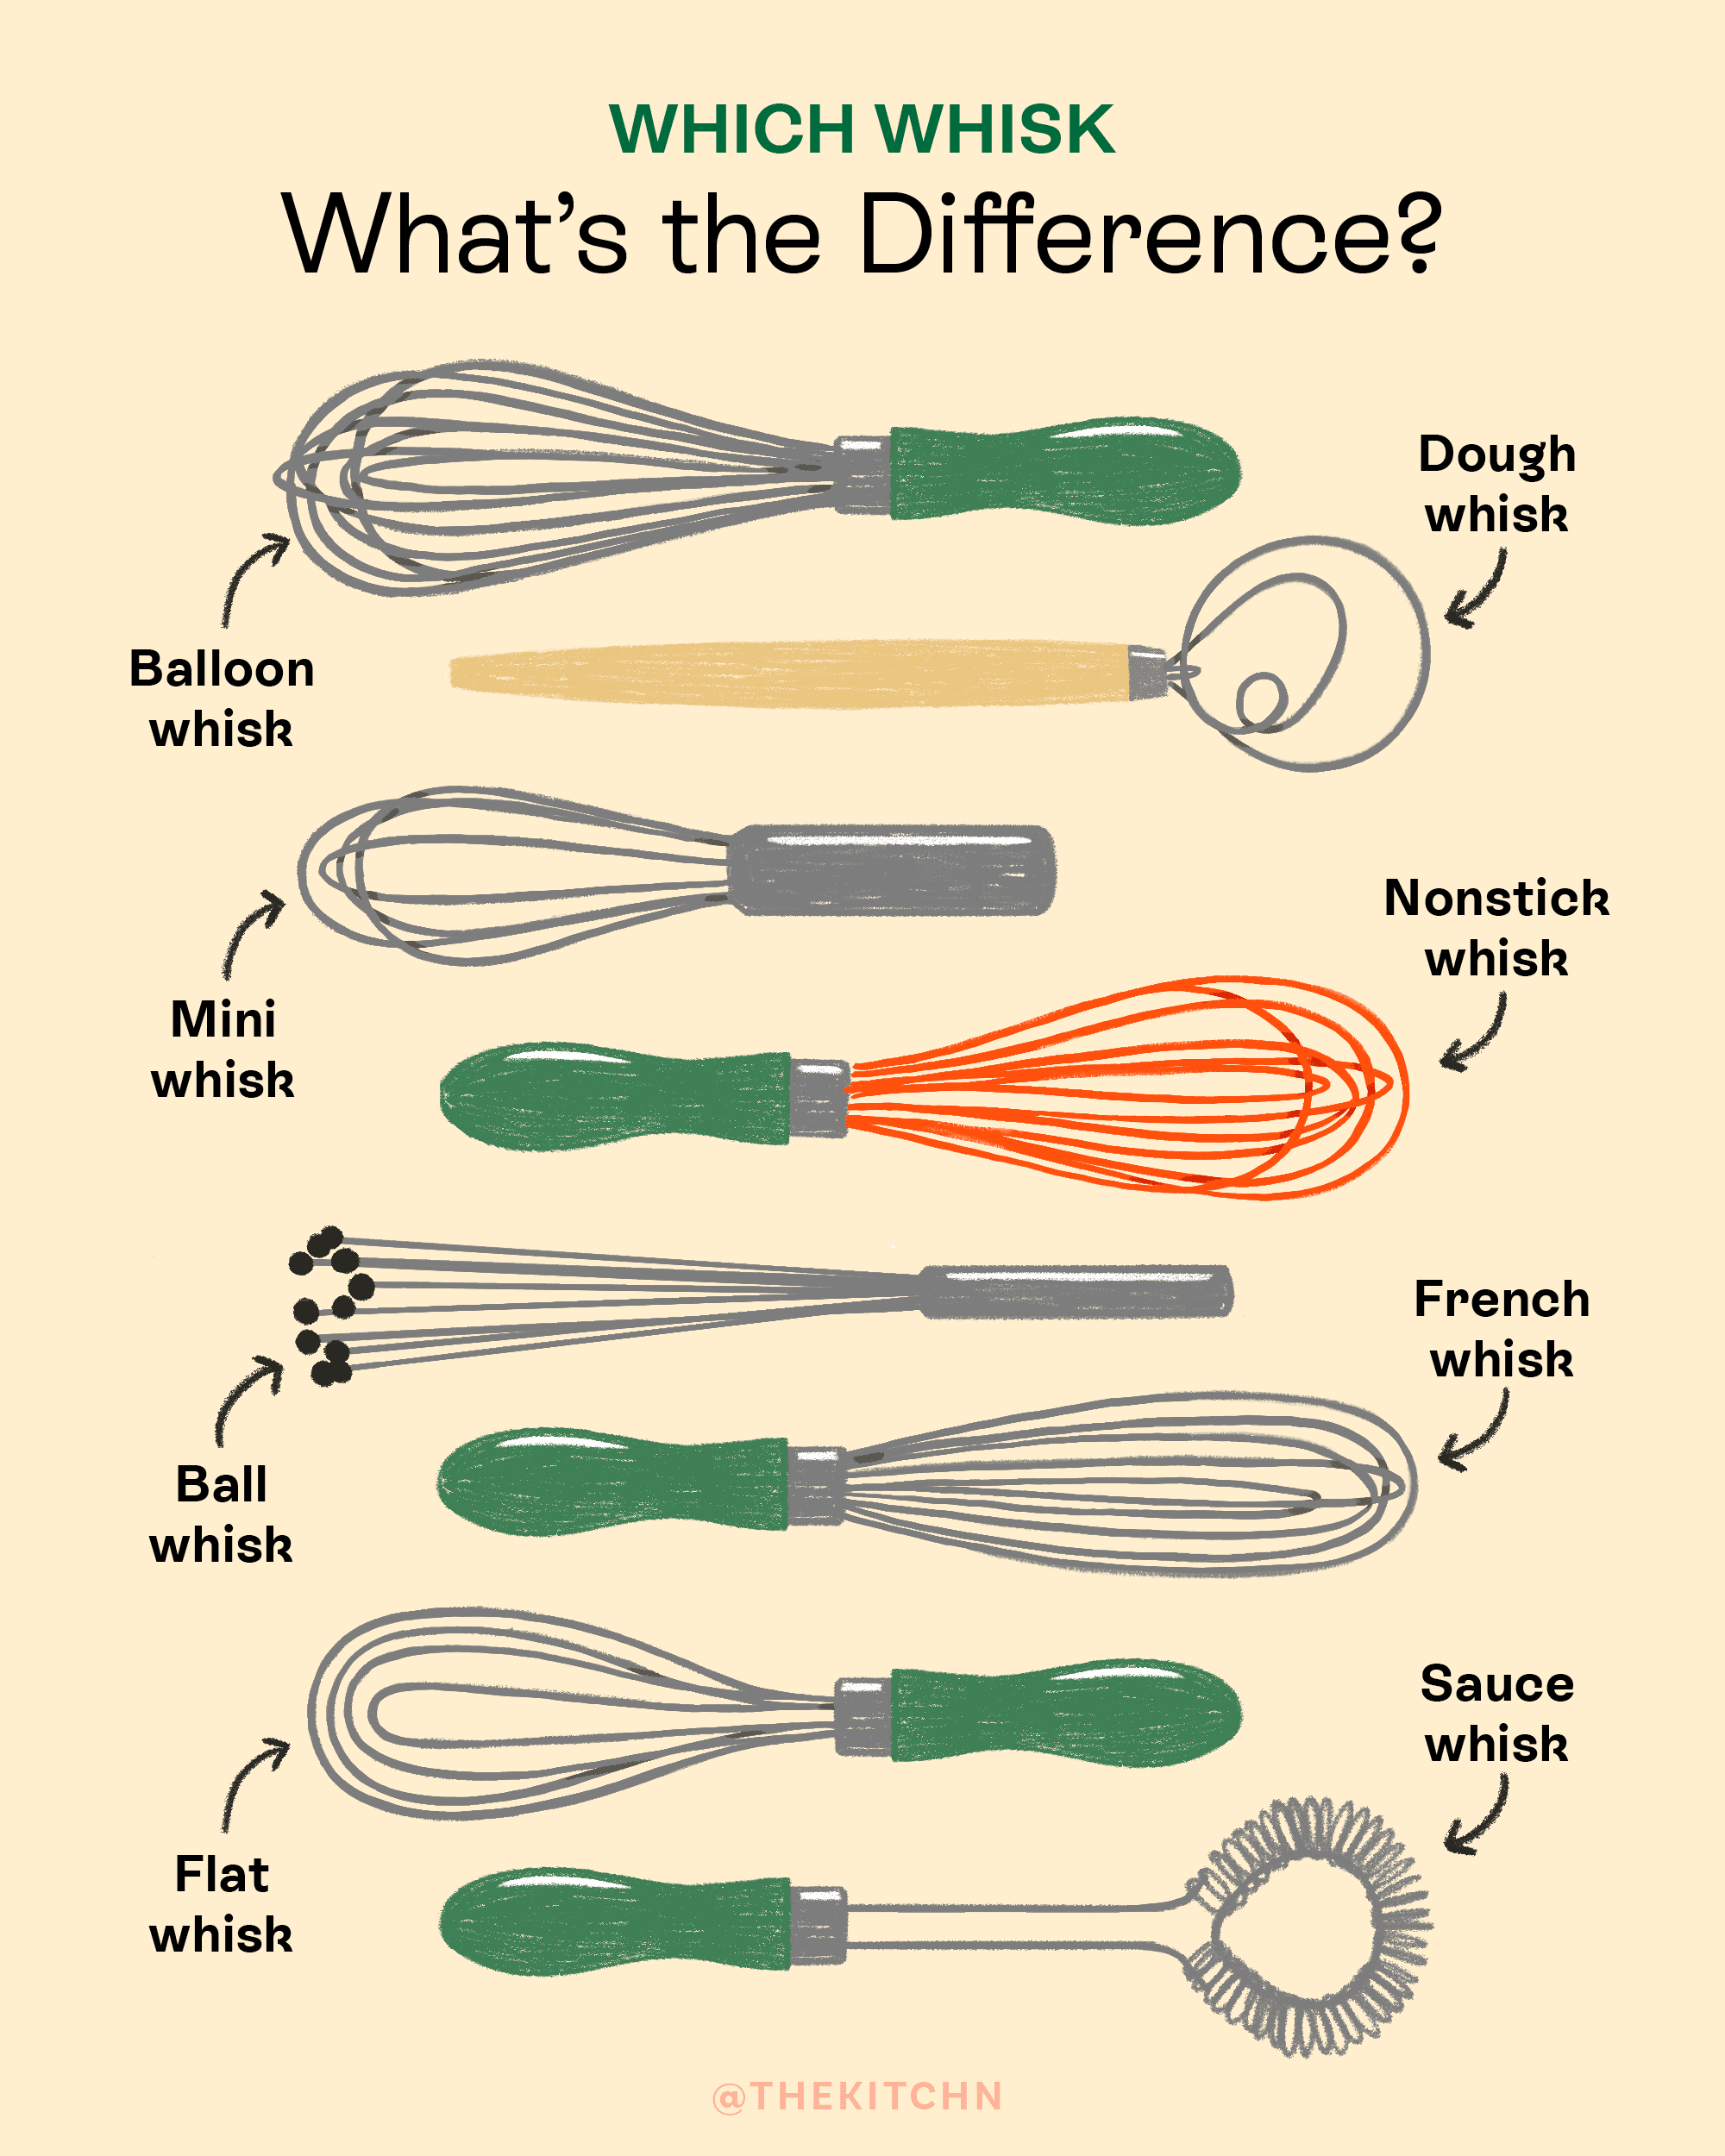 https://cdn.apartmenttherapy.info/image/upload/v1626454599/k/Design/2021-07/which-whisk-what-the-difference-IG-2.png